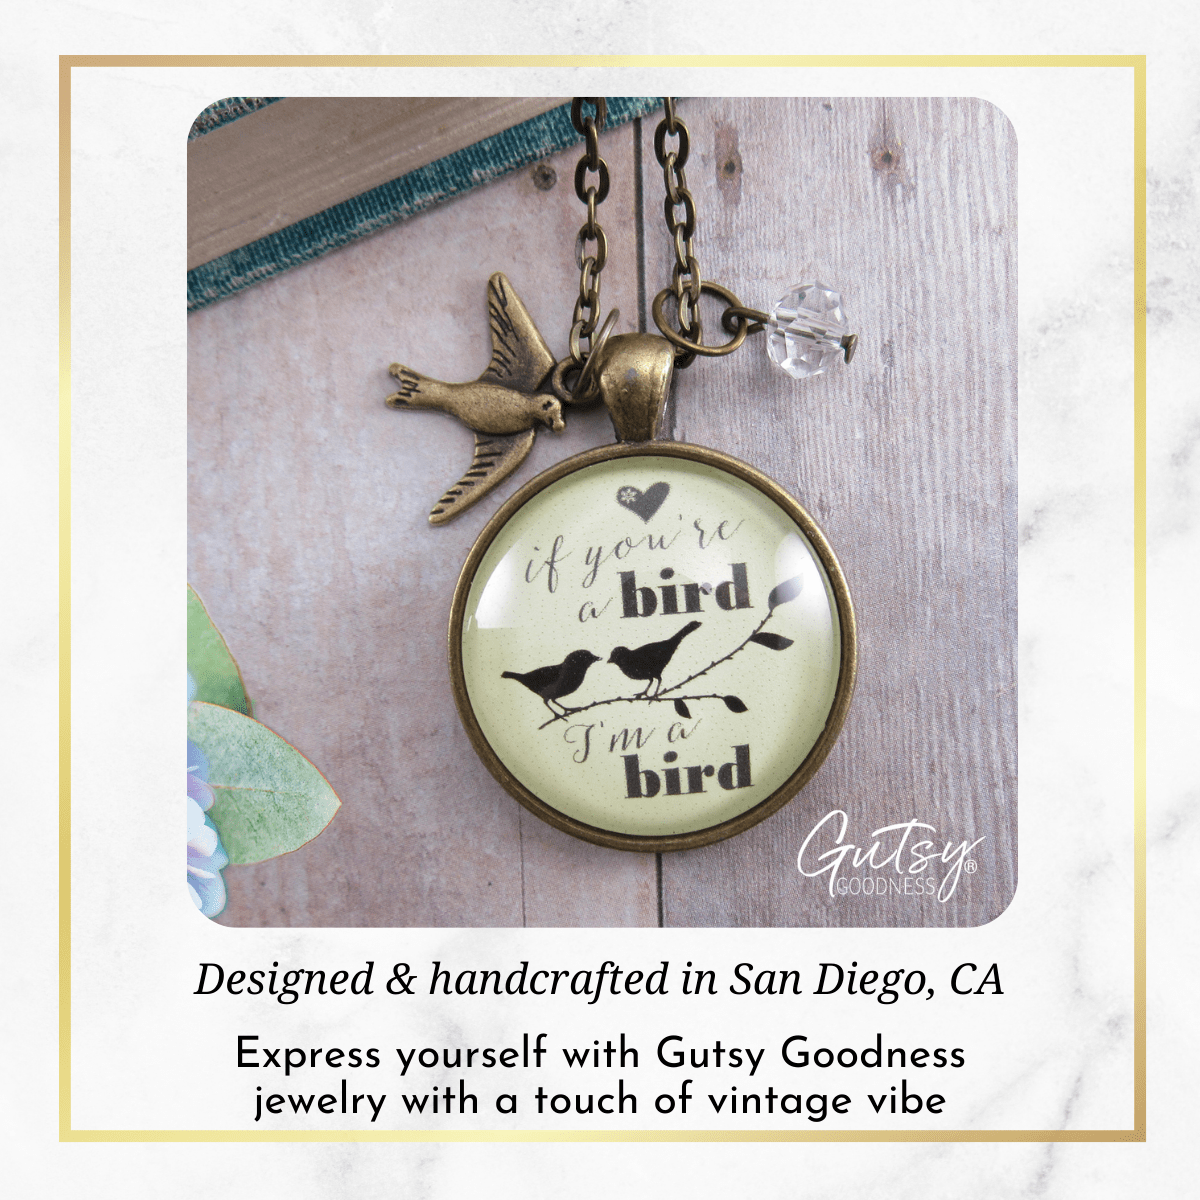 Gutsy Goodness If You're a Bird I'm a Bird Necklace Love Quote Boho Jewelry Gift - Gutsy Goodness Handmade Jewelry;If You're A Bird I'm A Bird - Gutsy Goodness Handmade Jewelry Gifts